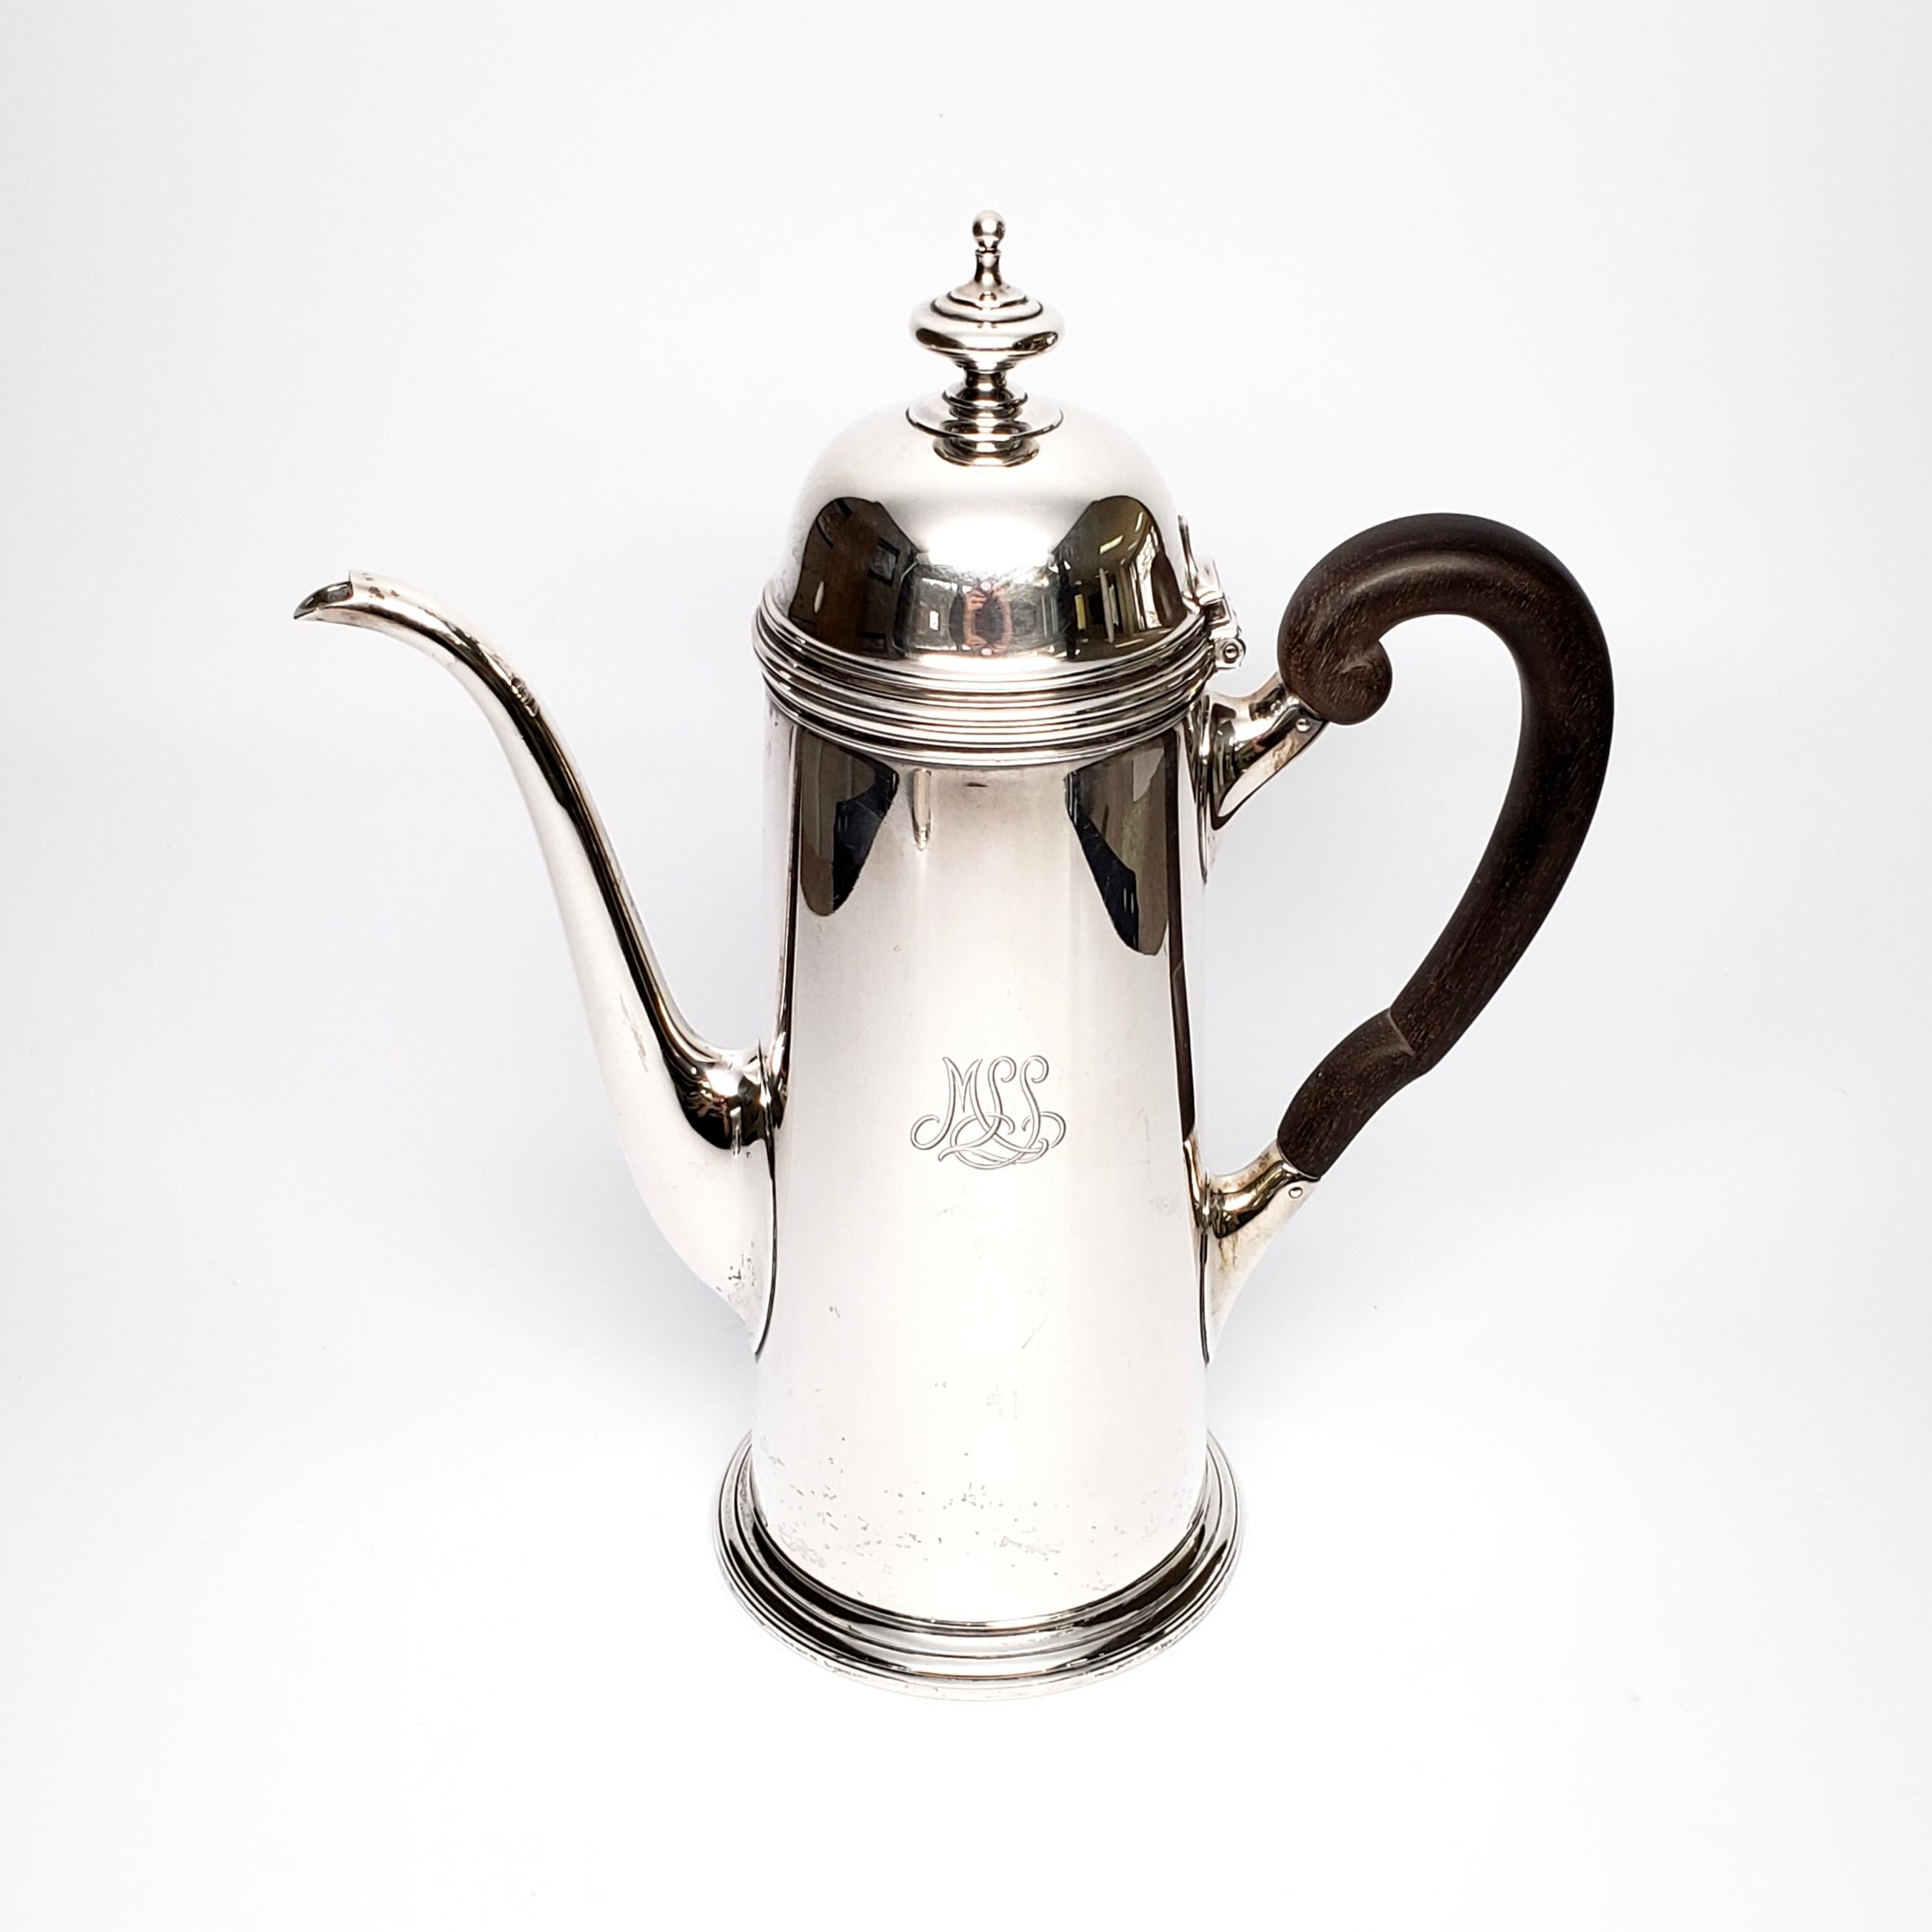 Vintage sterling silver 3 piece coffee set, from Tiffany & Co.

The 3 pieces of this beautiful Tiffany & Co set include a tall coffee pot, open creamer and lidded sugar bowl. All pieces are marked with an M, representing manufacture between